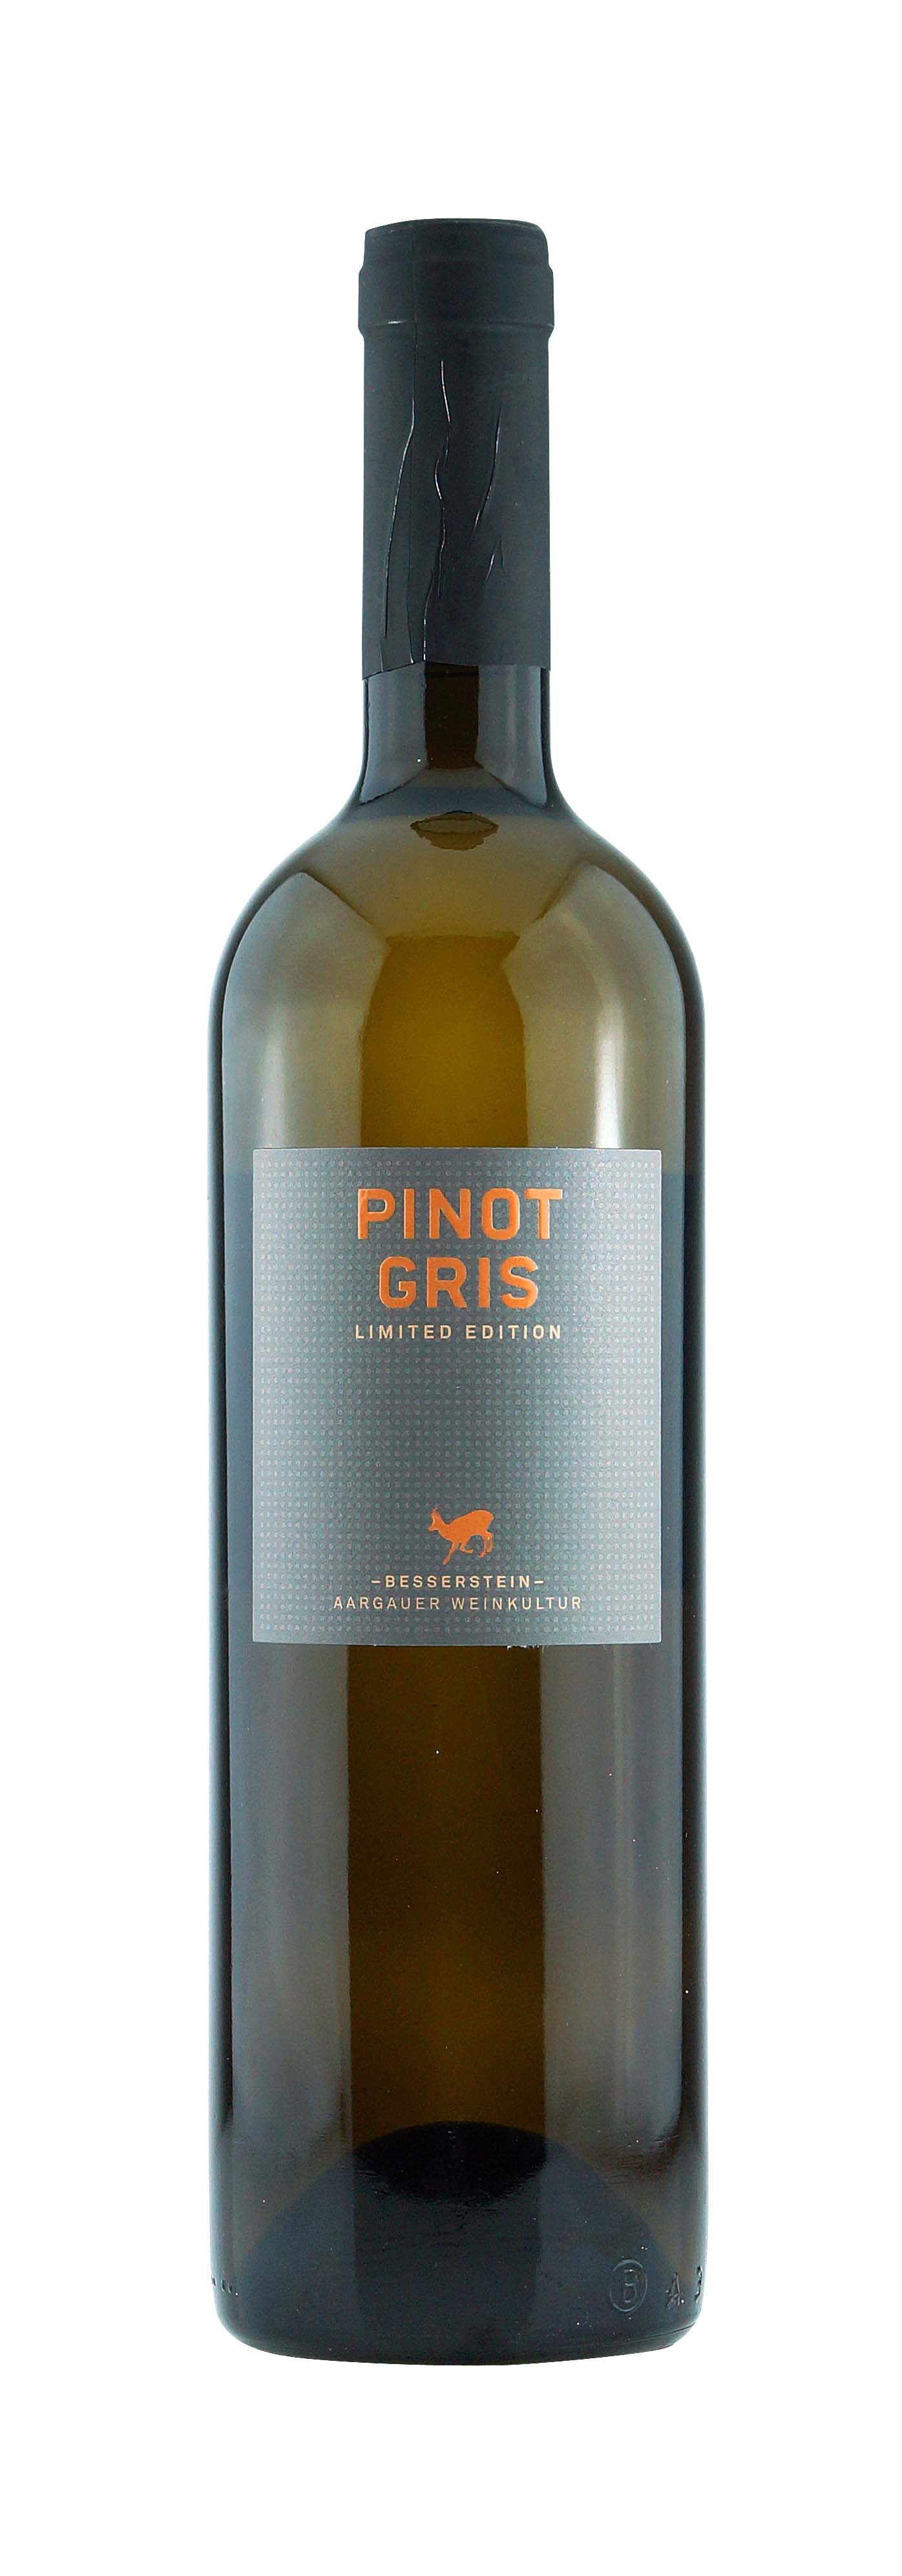 Aargau AOC Pinot Gris Limited Edition 2015